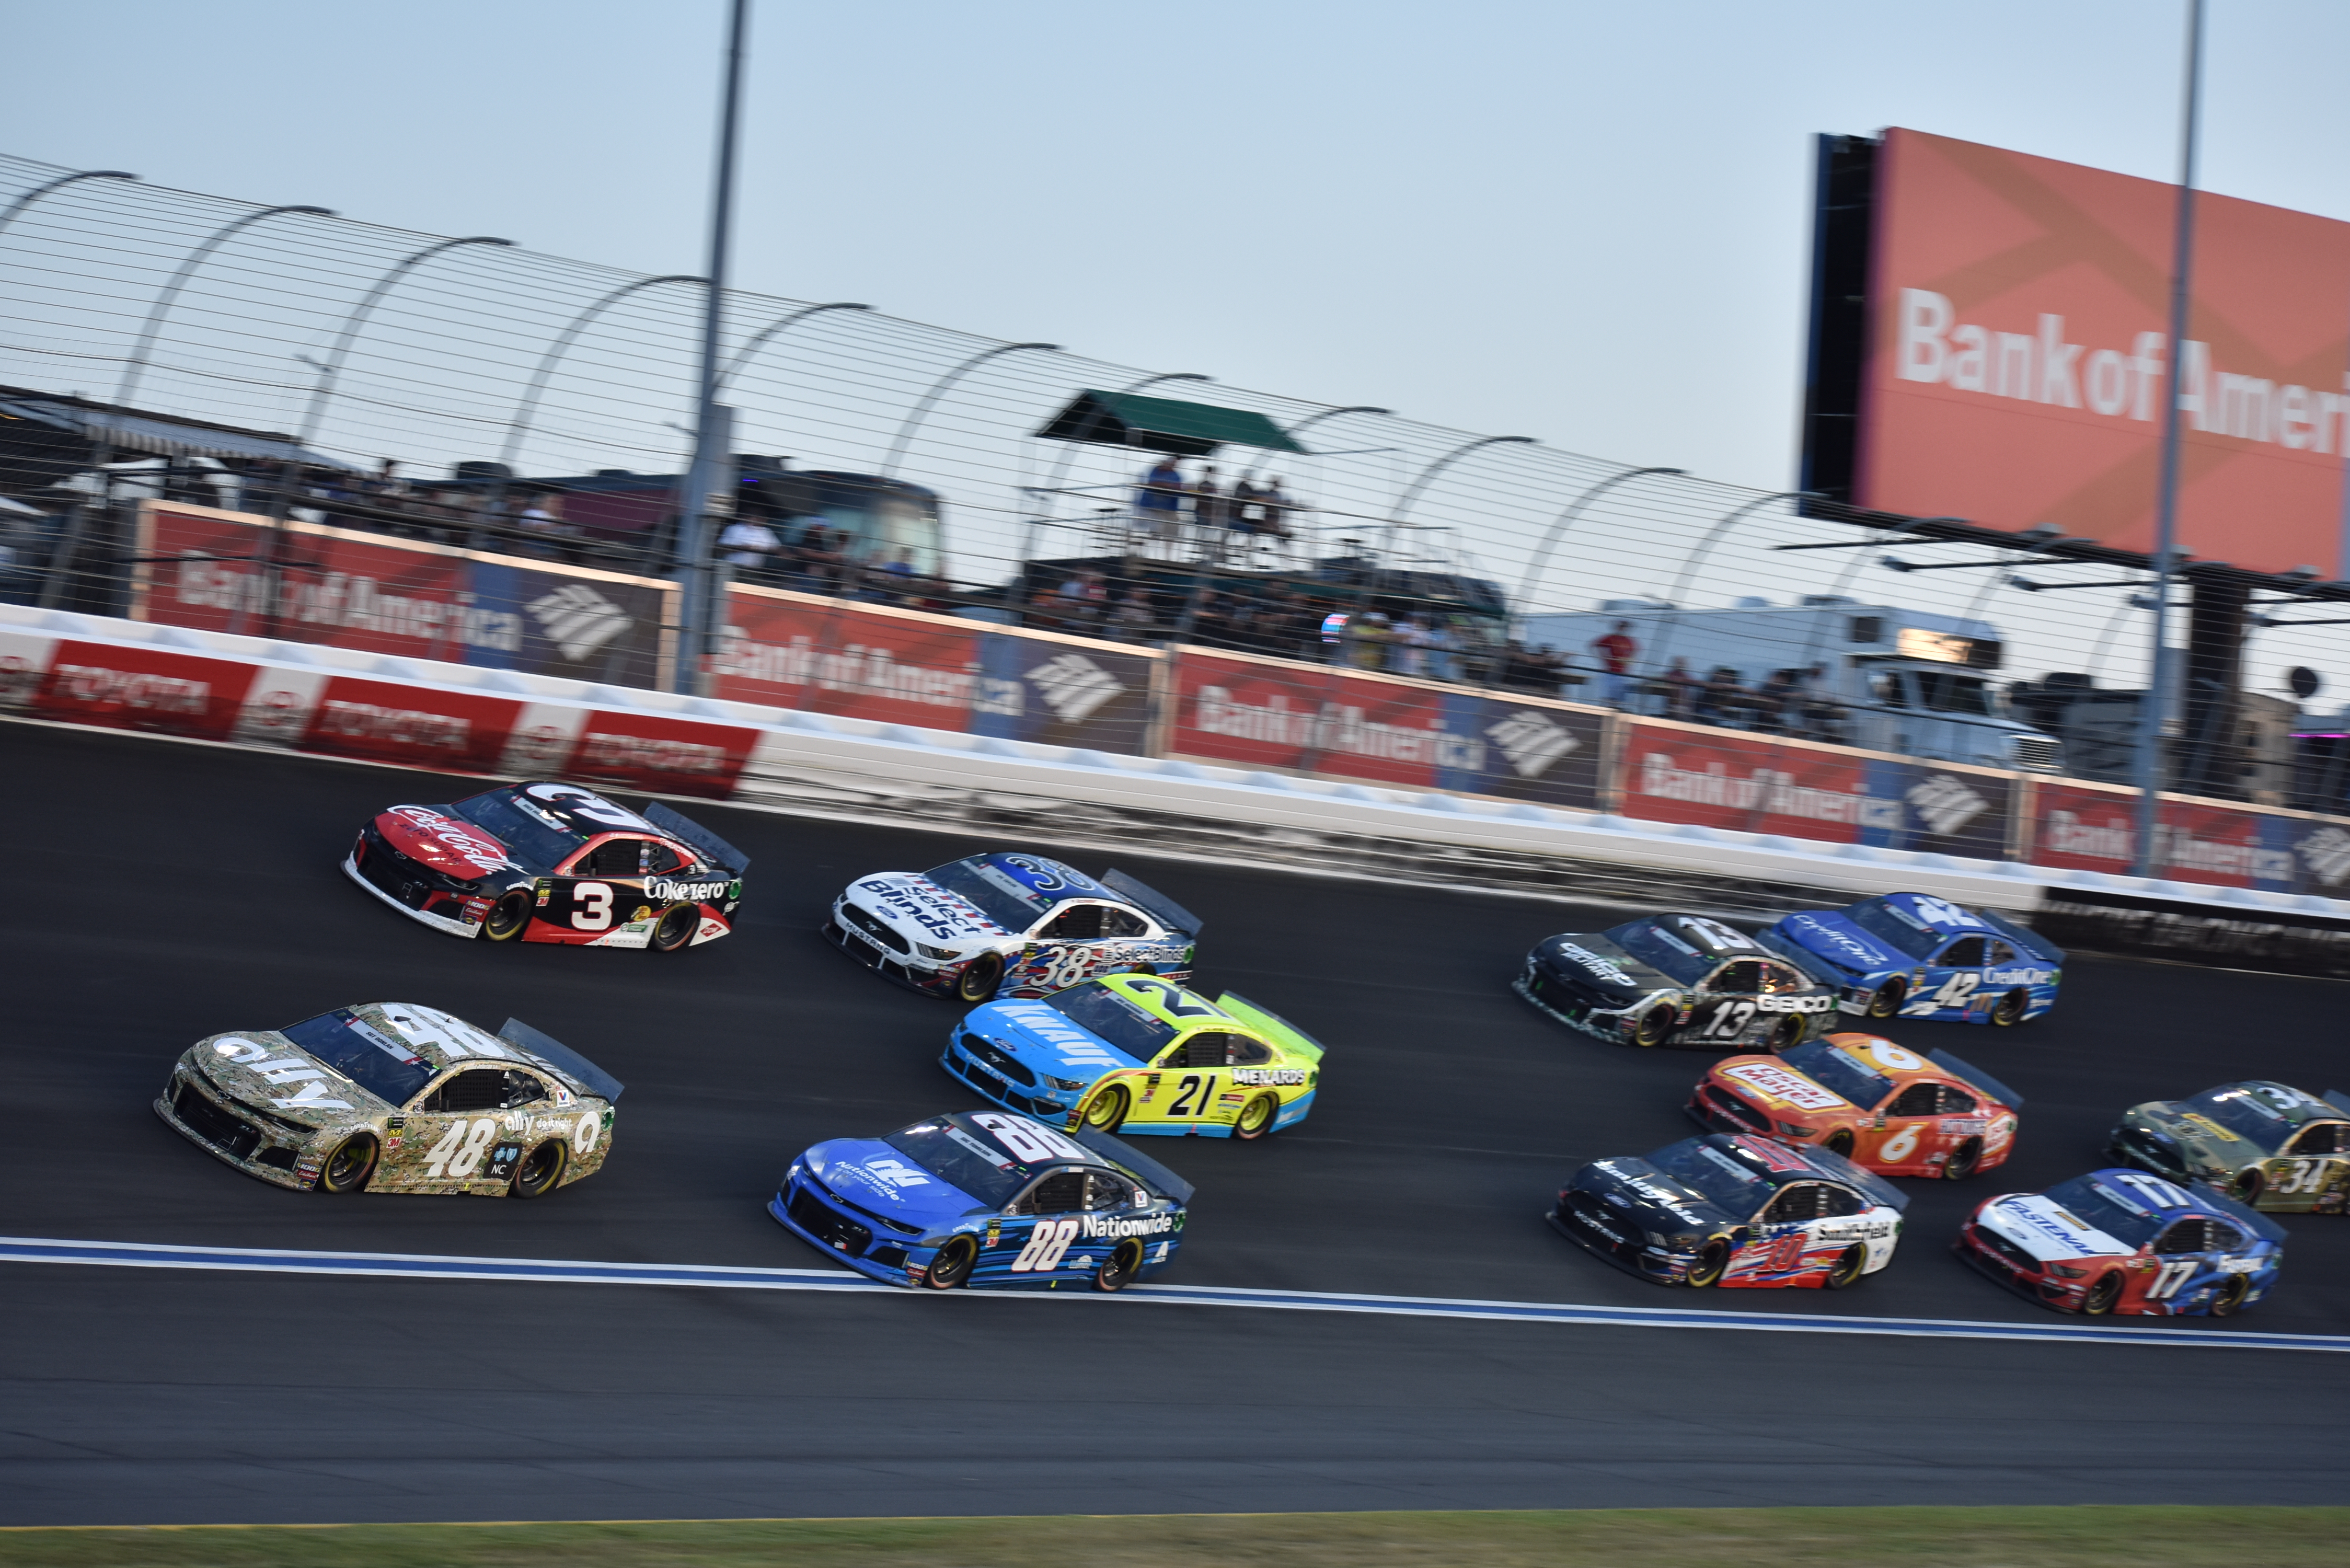 Low horsepower but three wide action, as seen at Charlotte. (Photo Credit: Andrew Fuller/TPF)